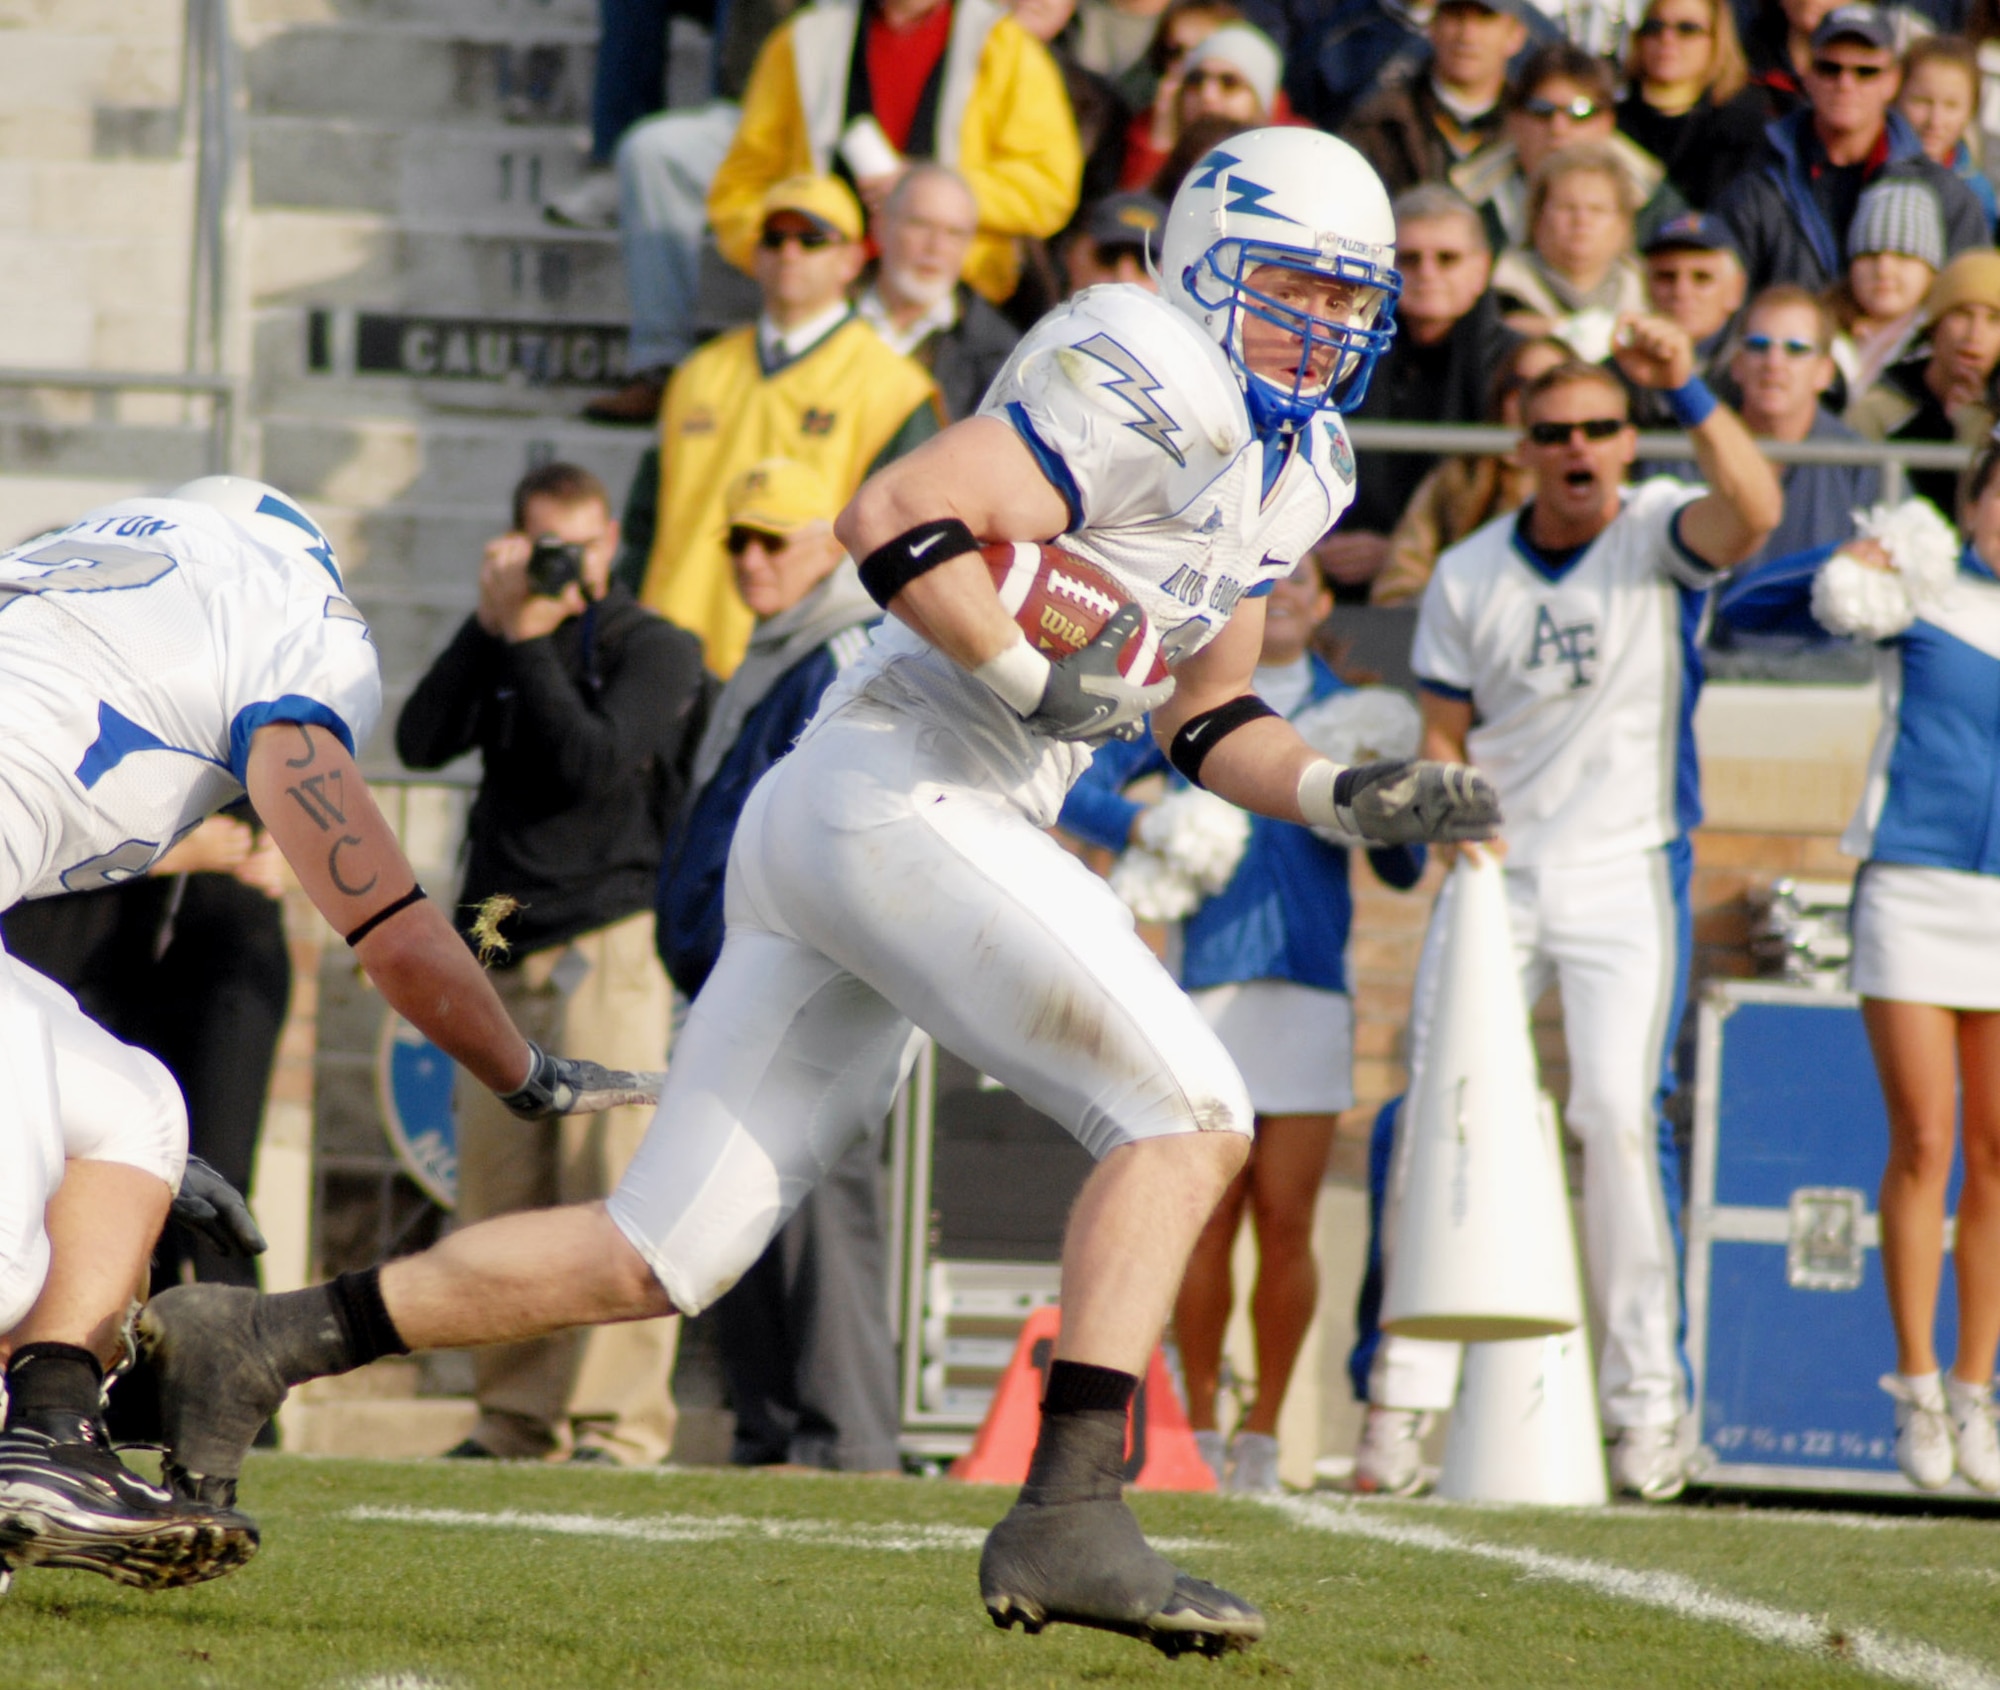 U.S. Air Force Academy Falcons outside linebacker John Rabold runs back a Notre Dame fumble for a touchdown in the the Air Force Academy's 41-24 rout of the Irish Nov. 10 at Notre Dame Stadium in Indiana. (Courtesy photo by Vanessa Gempis) 
